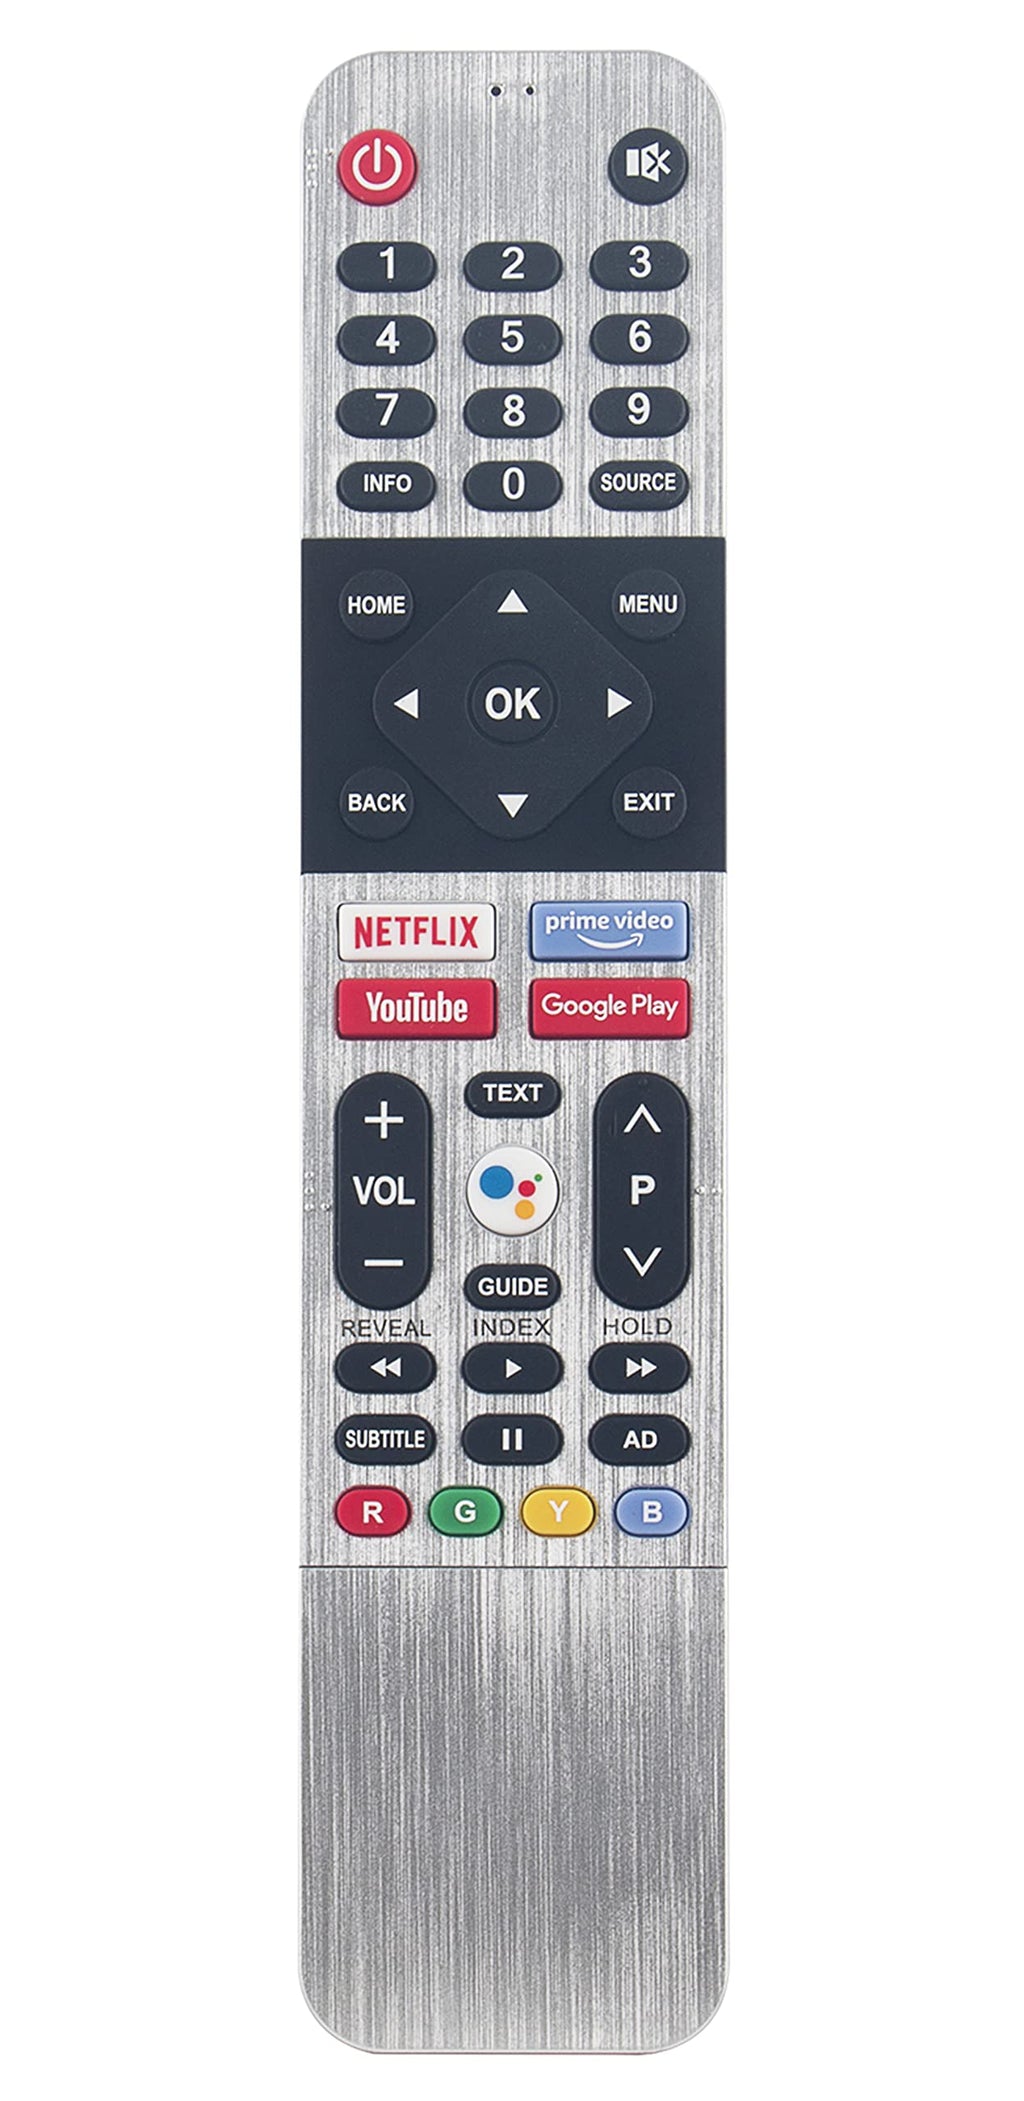 Replace Remote Control Compatible with Skyworth 4K Android TV XC9300 XC9000 UC7500 UC6200 TC6200 50SUC6500 55SUC6500 65SUC6500 55XC9000 55UC7500 65UC7500 65XC9000 43UC7500 50UC7500  50UC6200 55UC6200